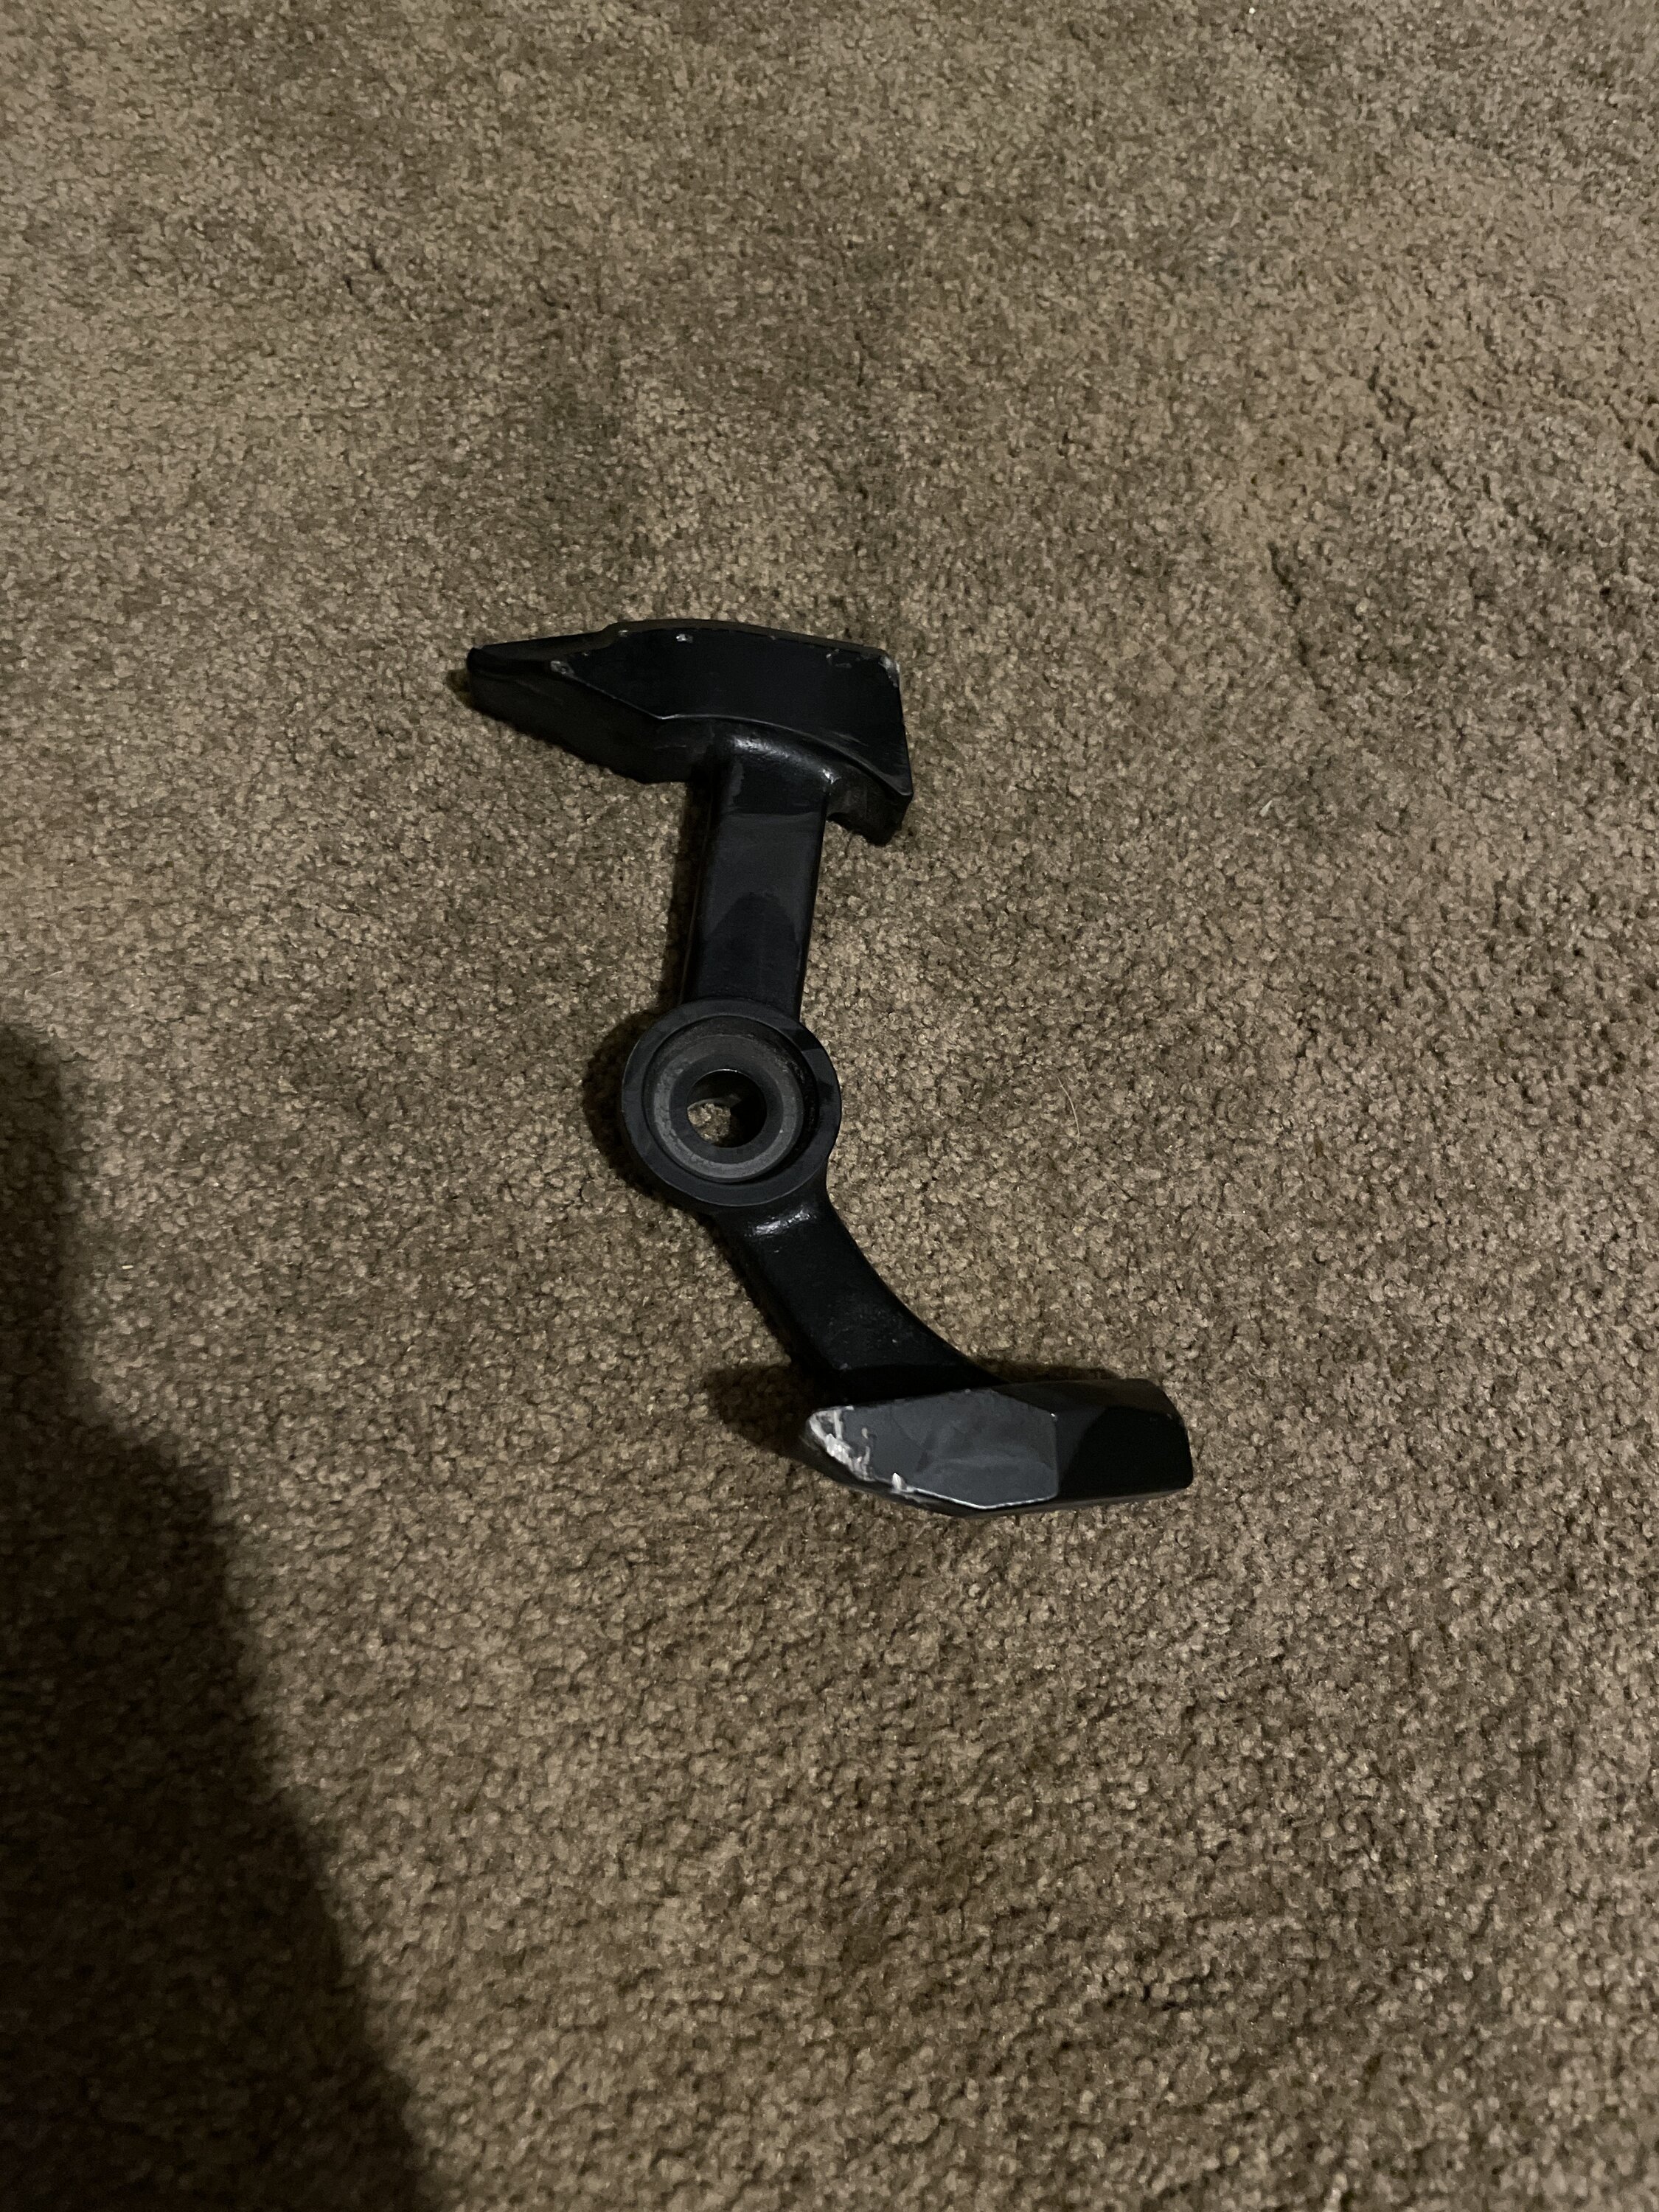 S650 Mustang What is this part I think it fell off of the car. 2019 Mustang GT image